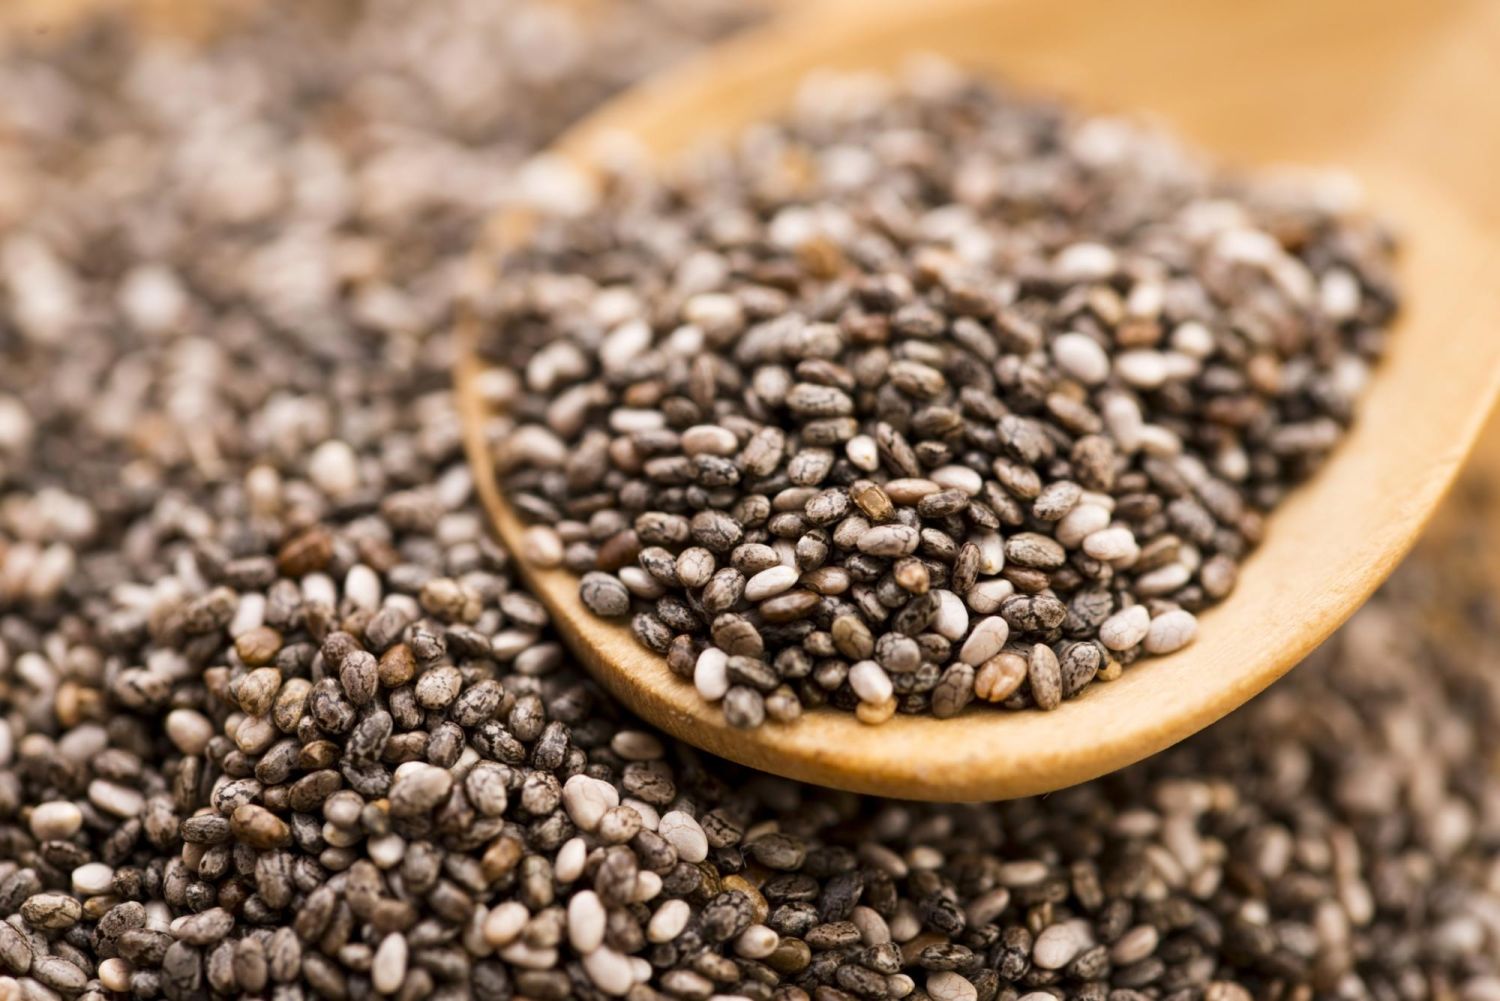 The magic seed is a super food, as it contains 10 times more omega-3s than salmon. 